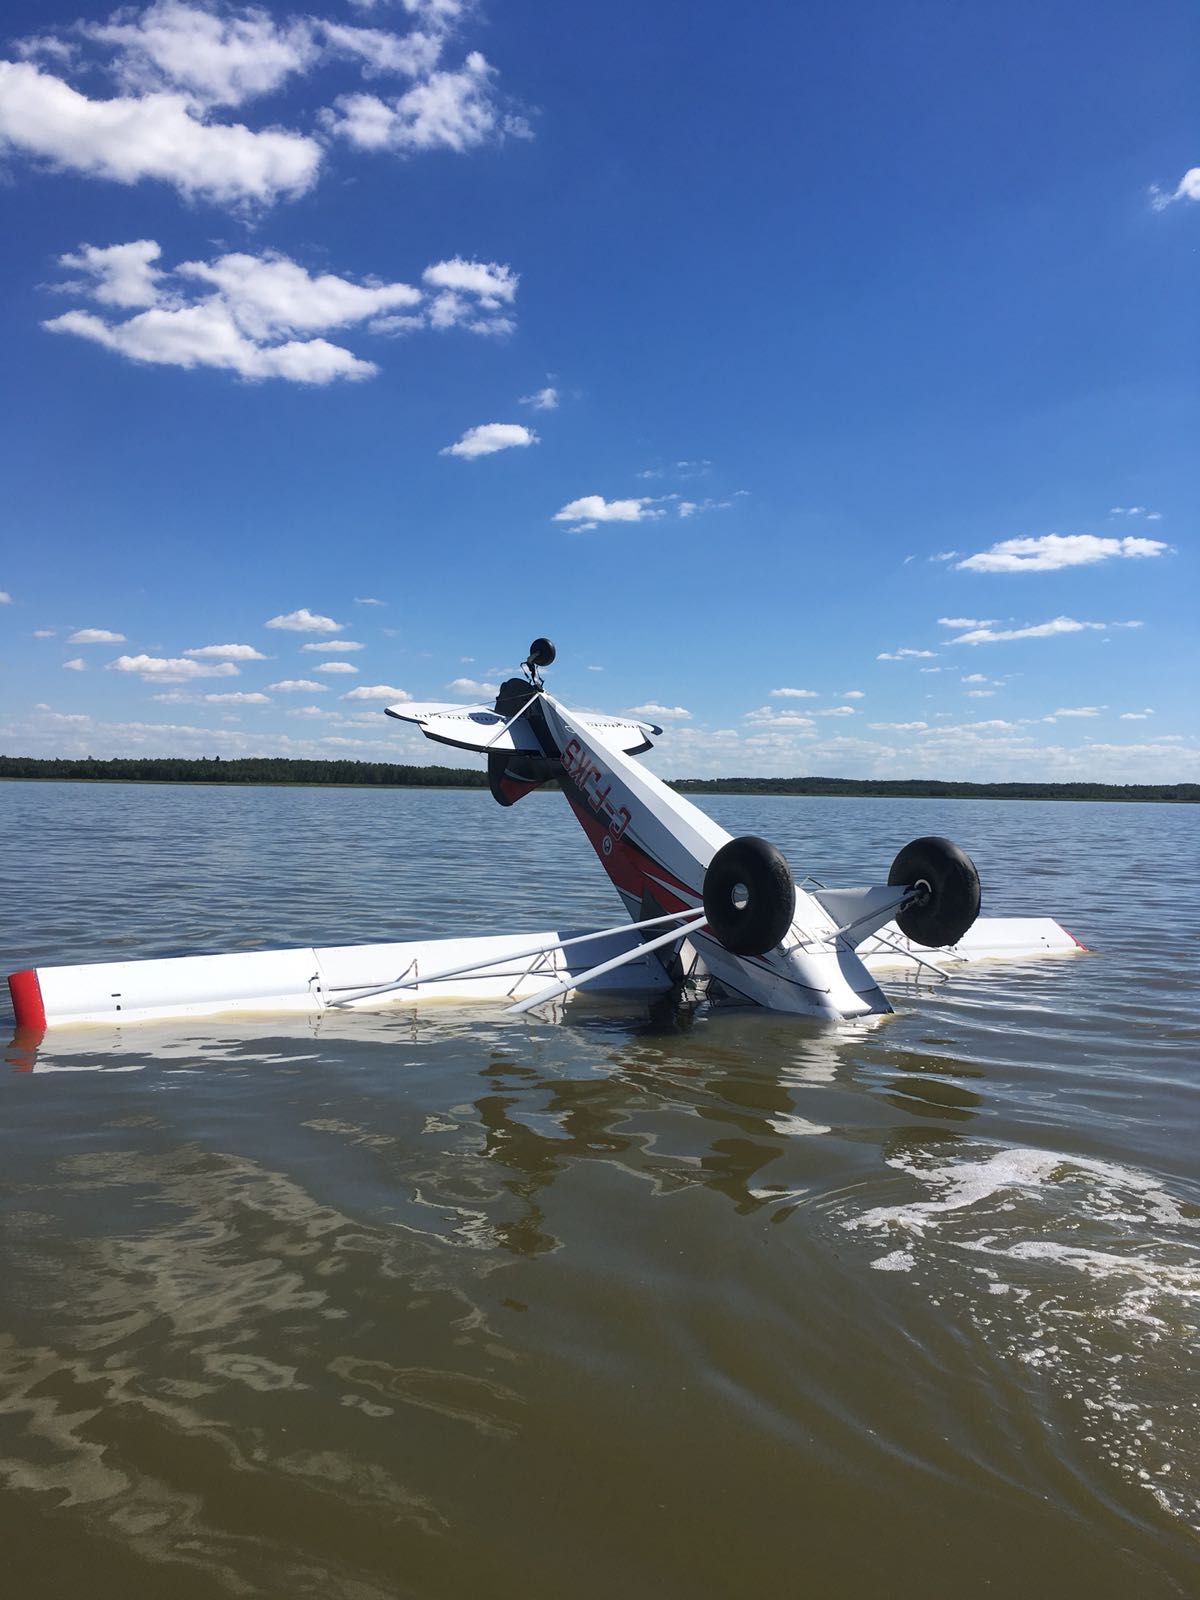 A pilot was uninjured after the aircraft he was operating crashed into water in Leduc County, June 17, 2018. 